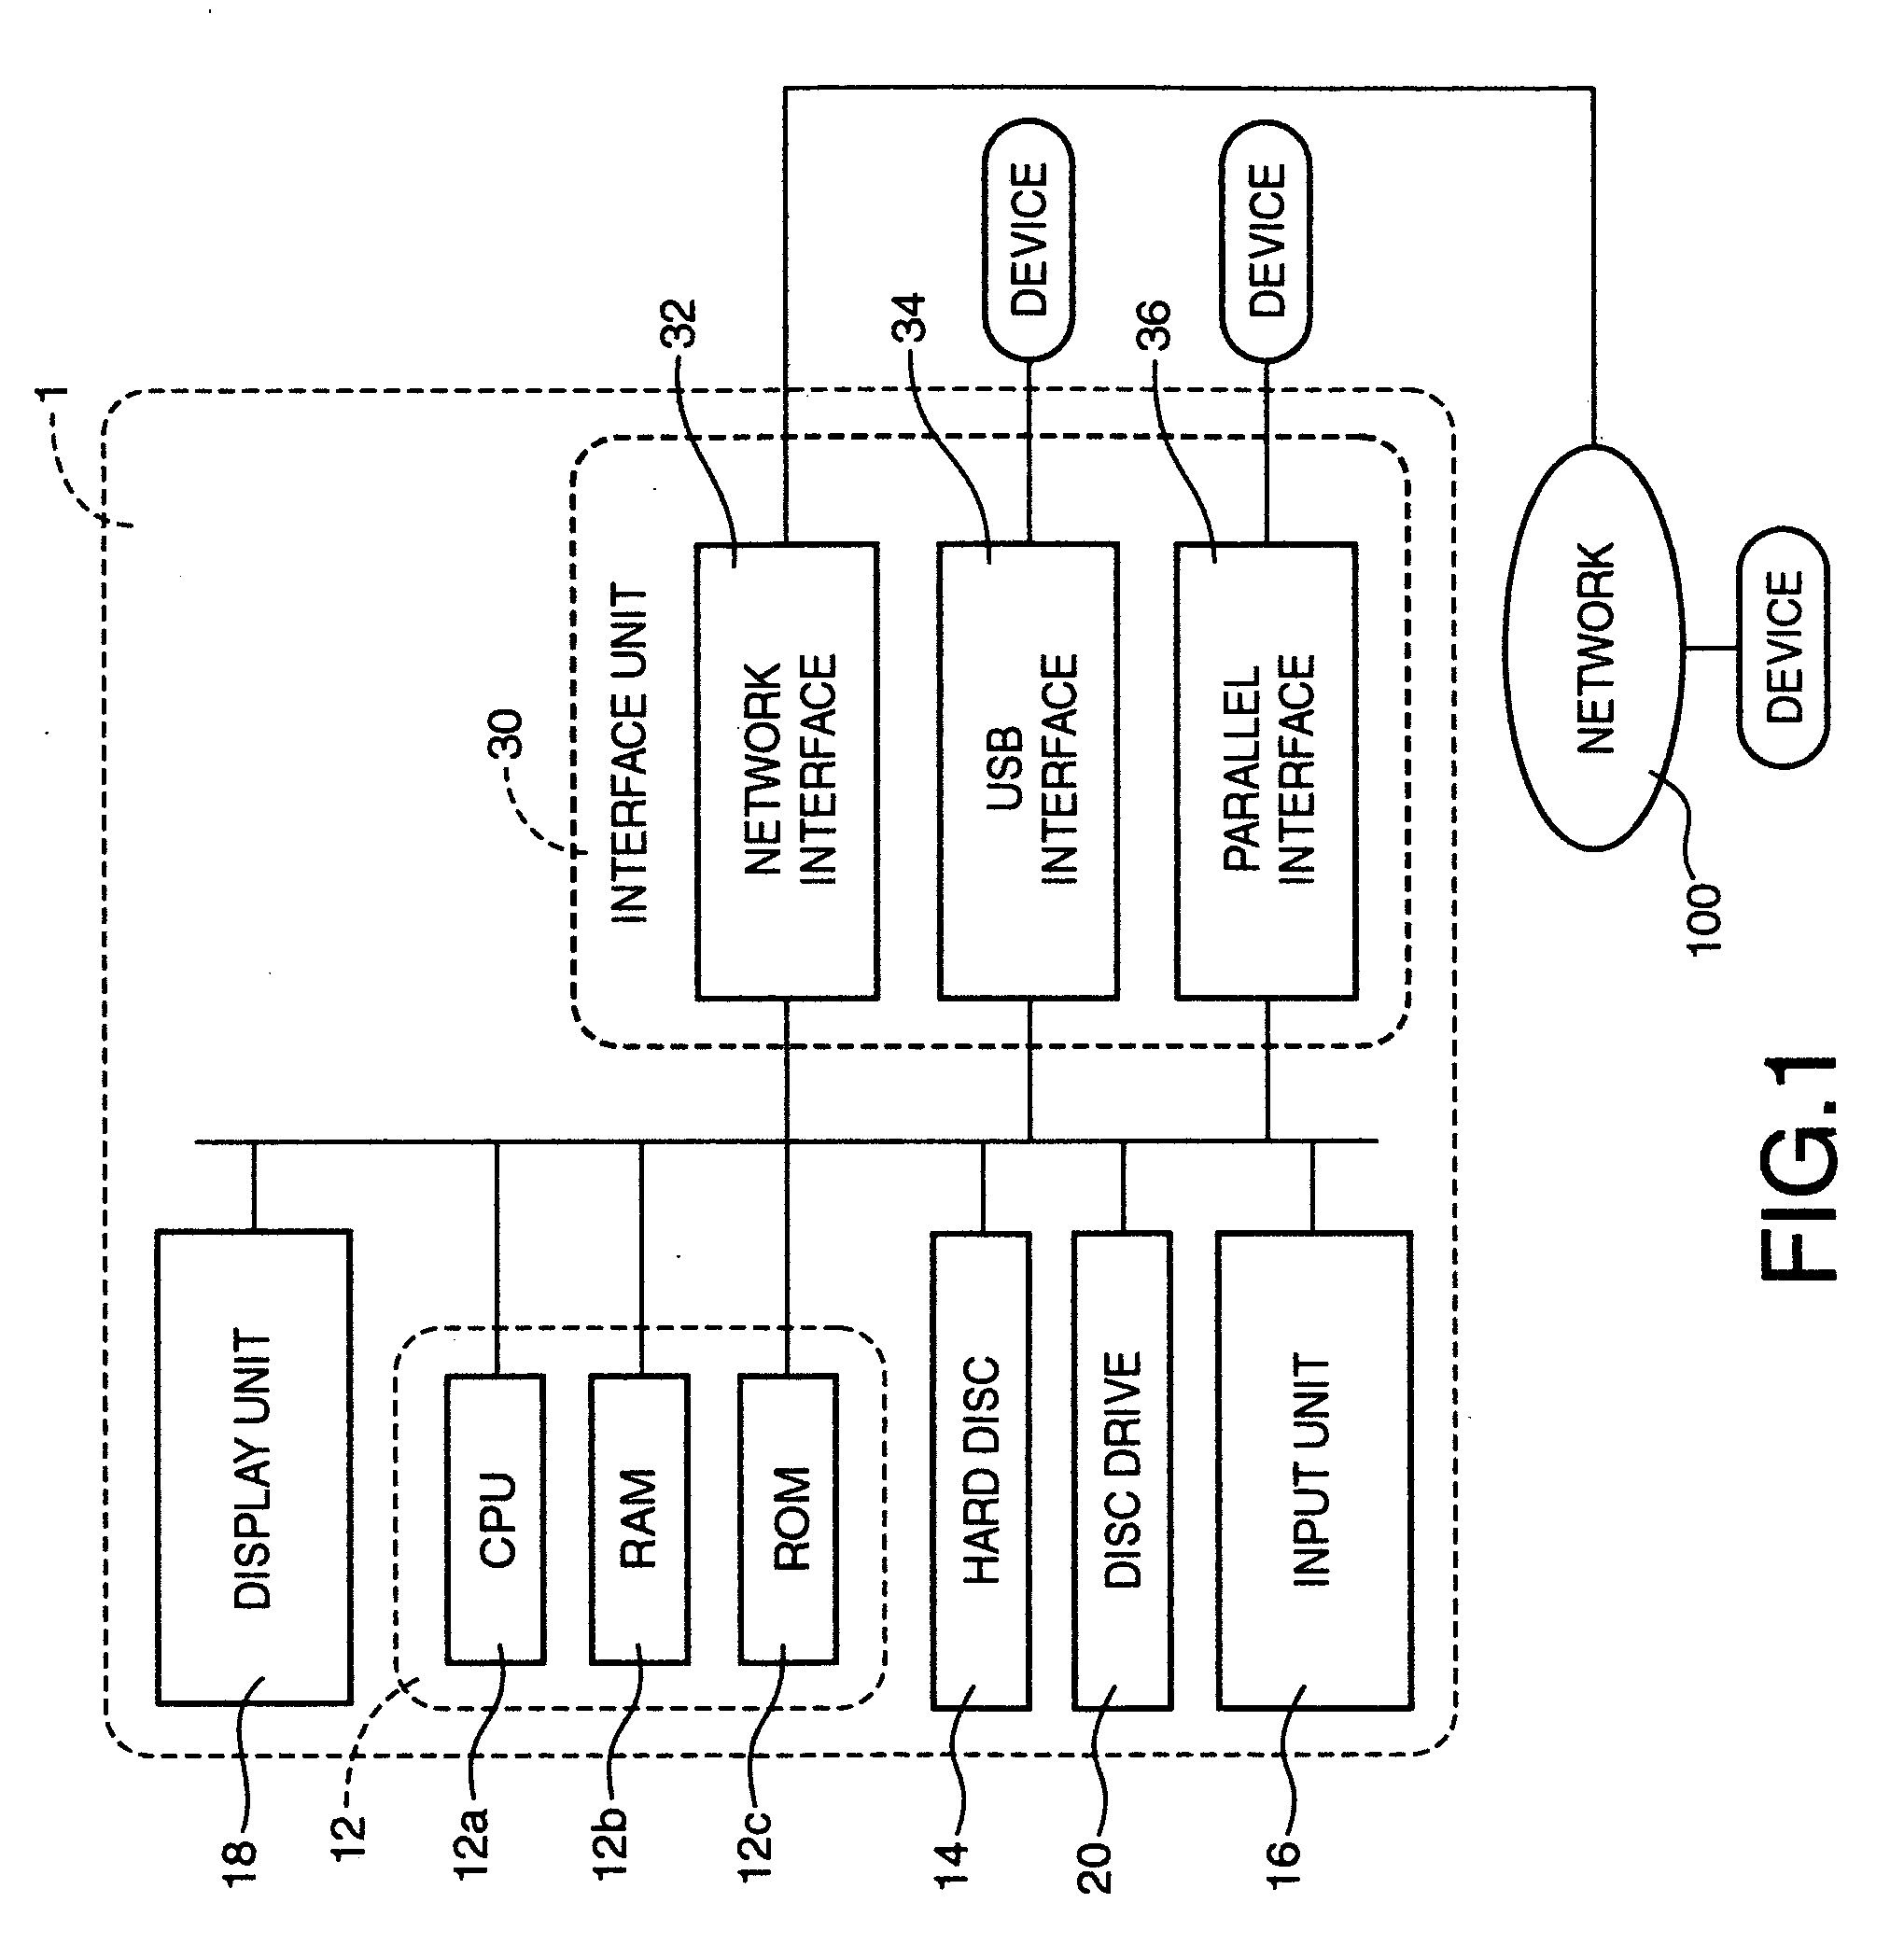 Computer-readable program product, process and apparatus for installing device driver